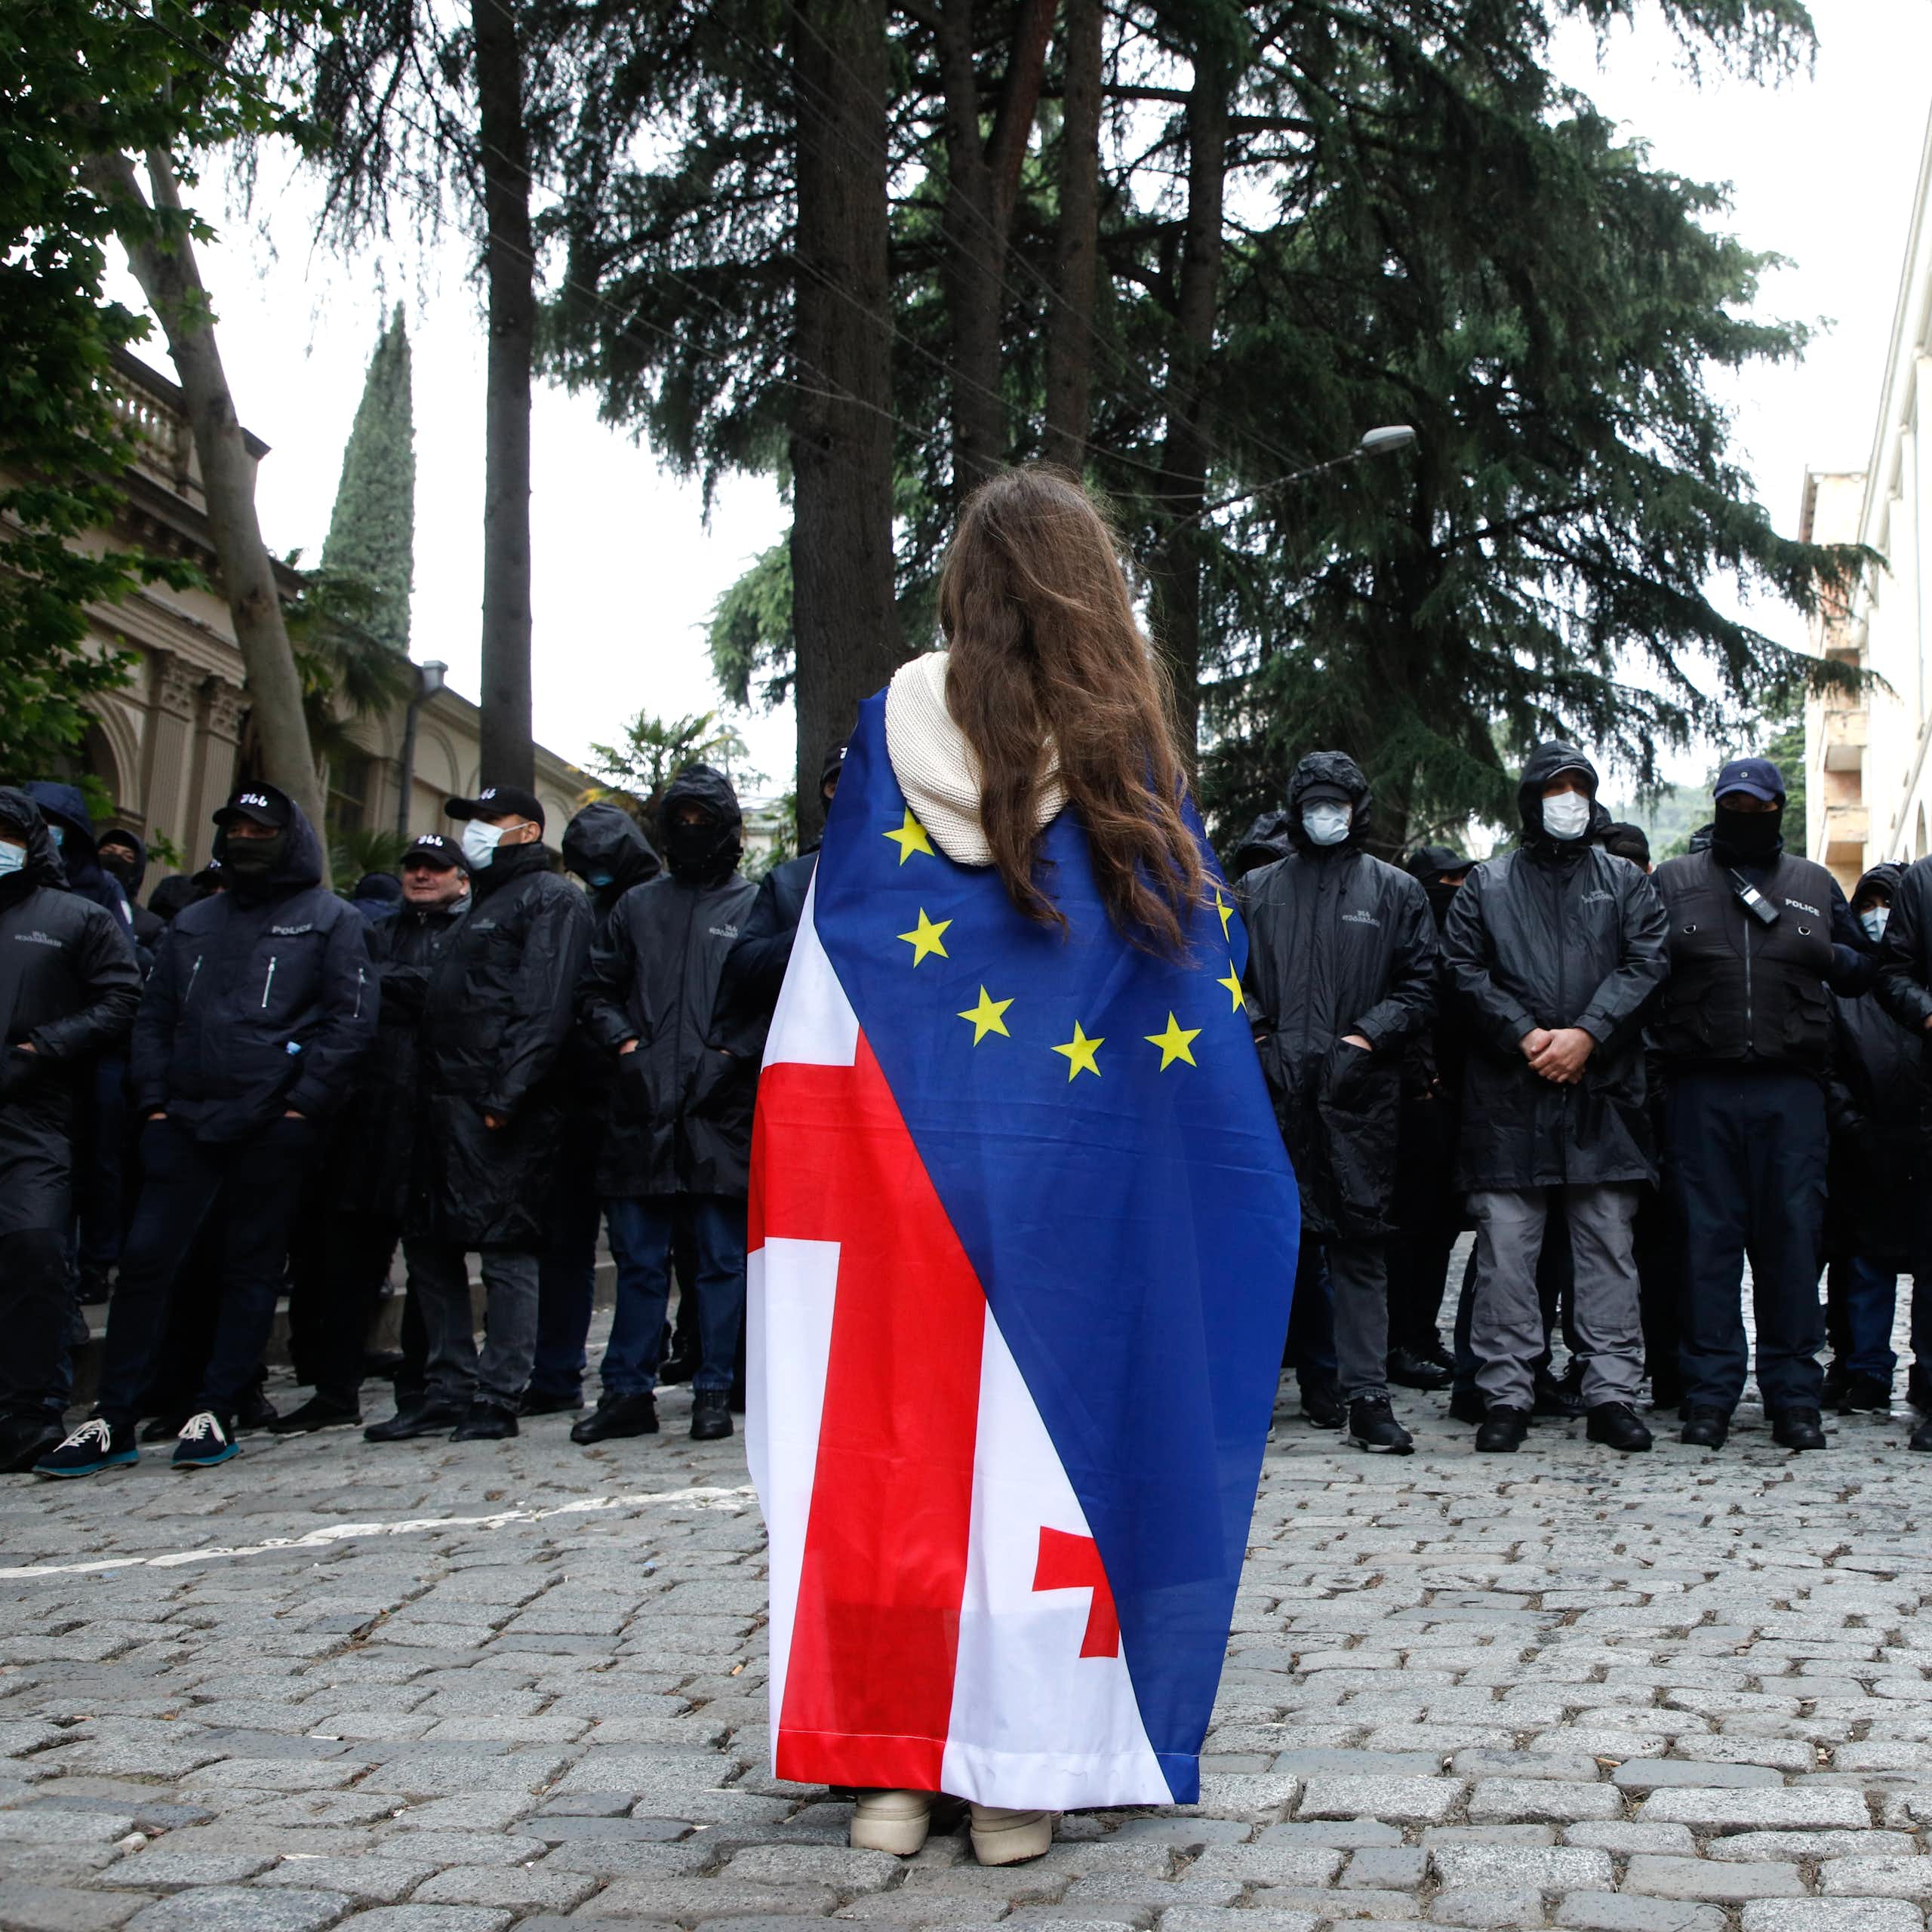 A protester wearing a Georgian and European flag faces off with policemen blocking a street.